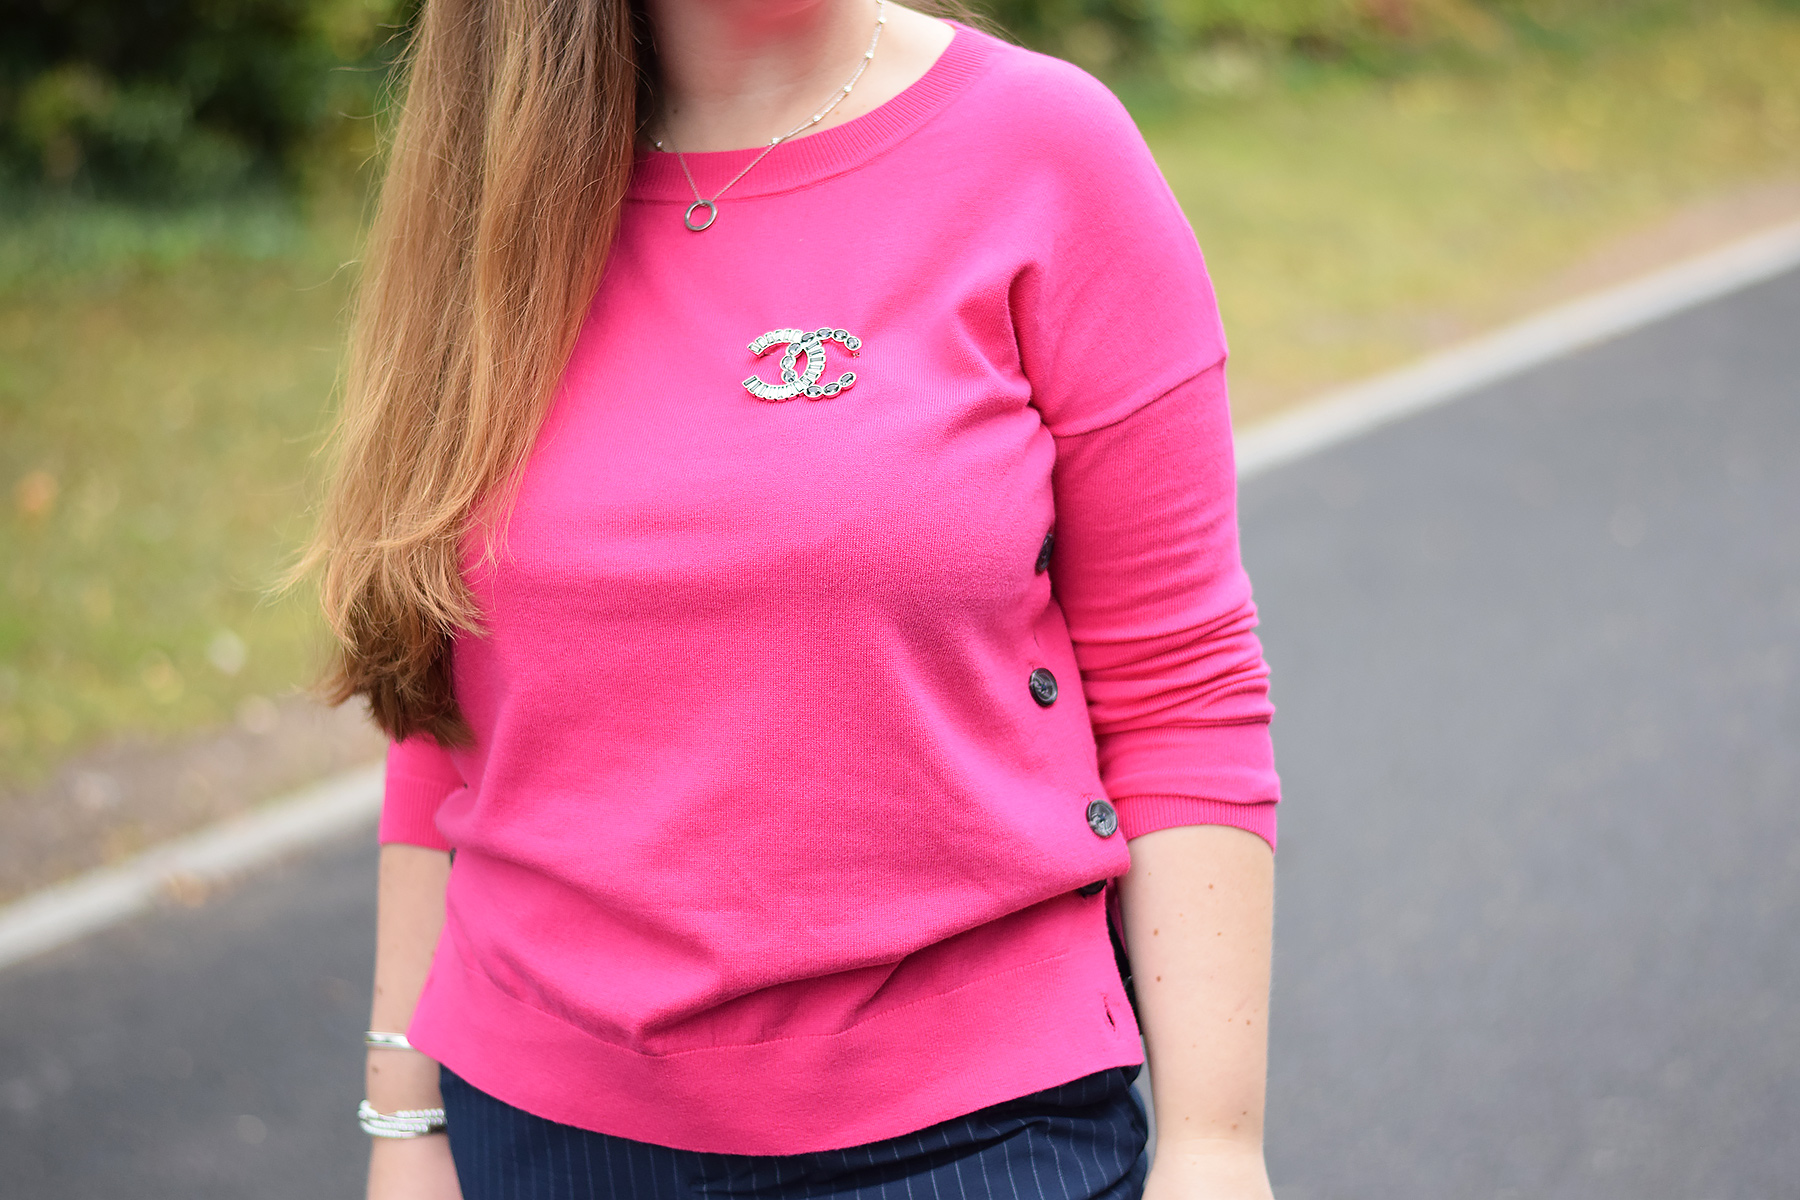 Boden Grace button sweater in a bright pink colour and Chanel diamanté brooch